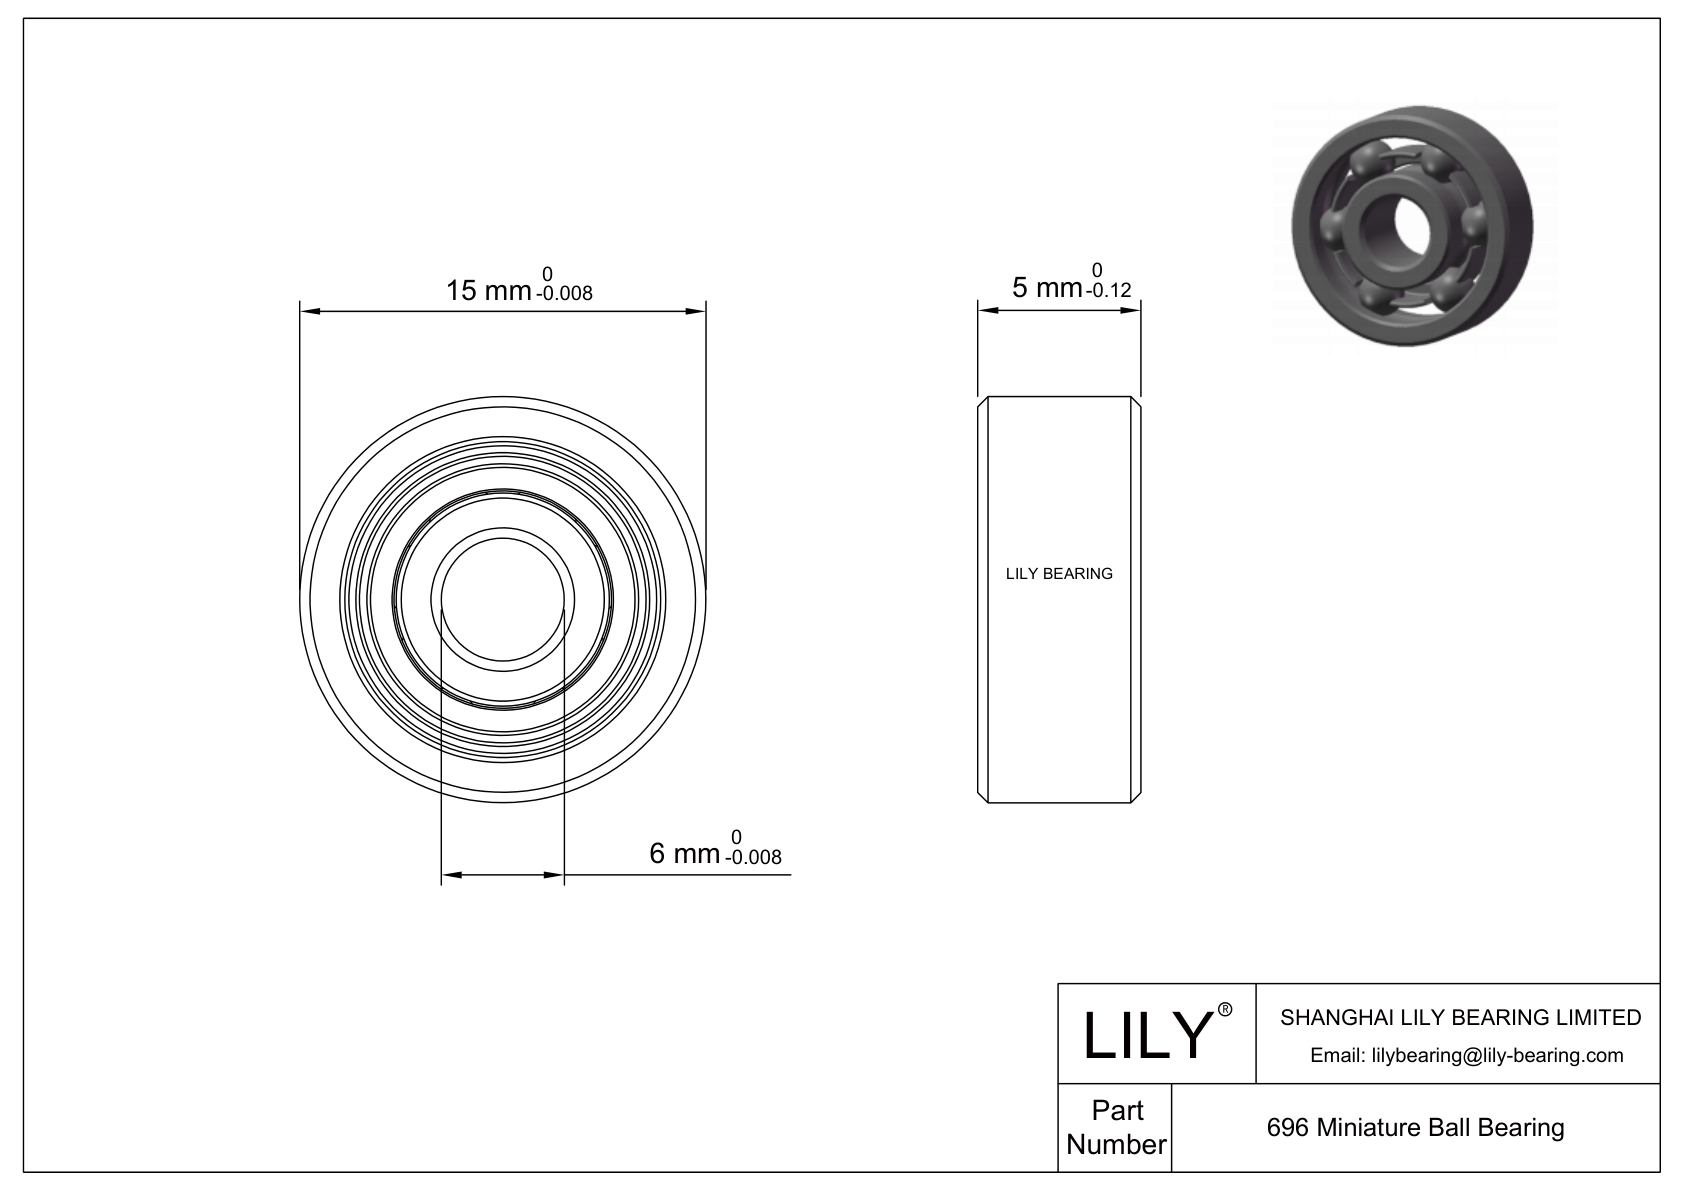 LILY-PU69620-6C1L8M6 Polyurethane Coated Bearing With Screw cad drawing